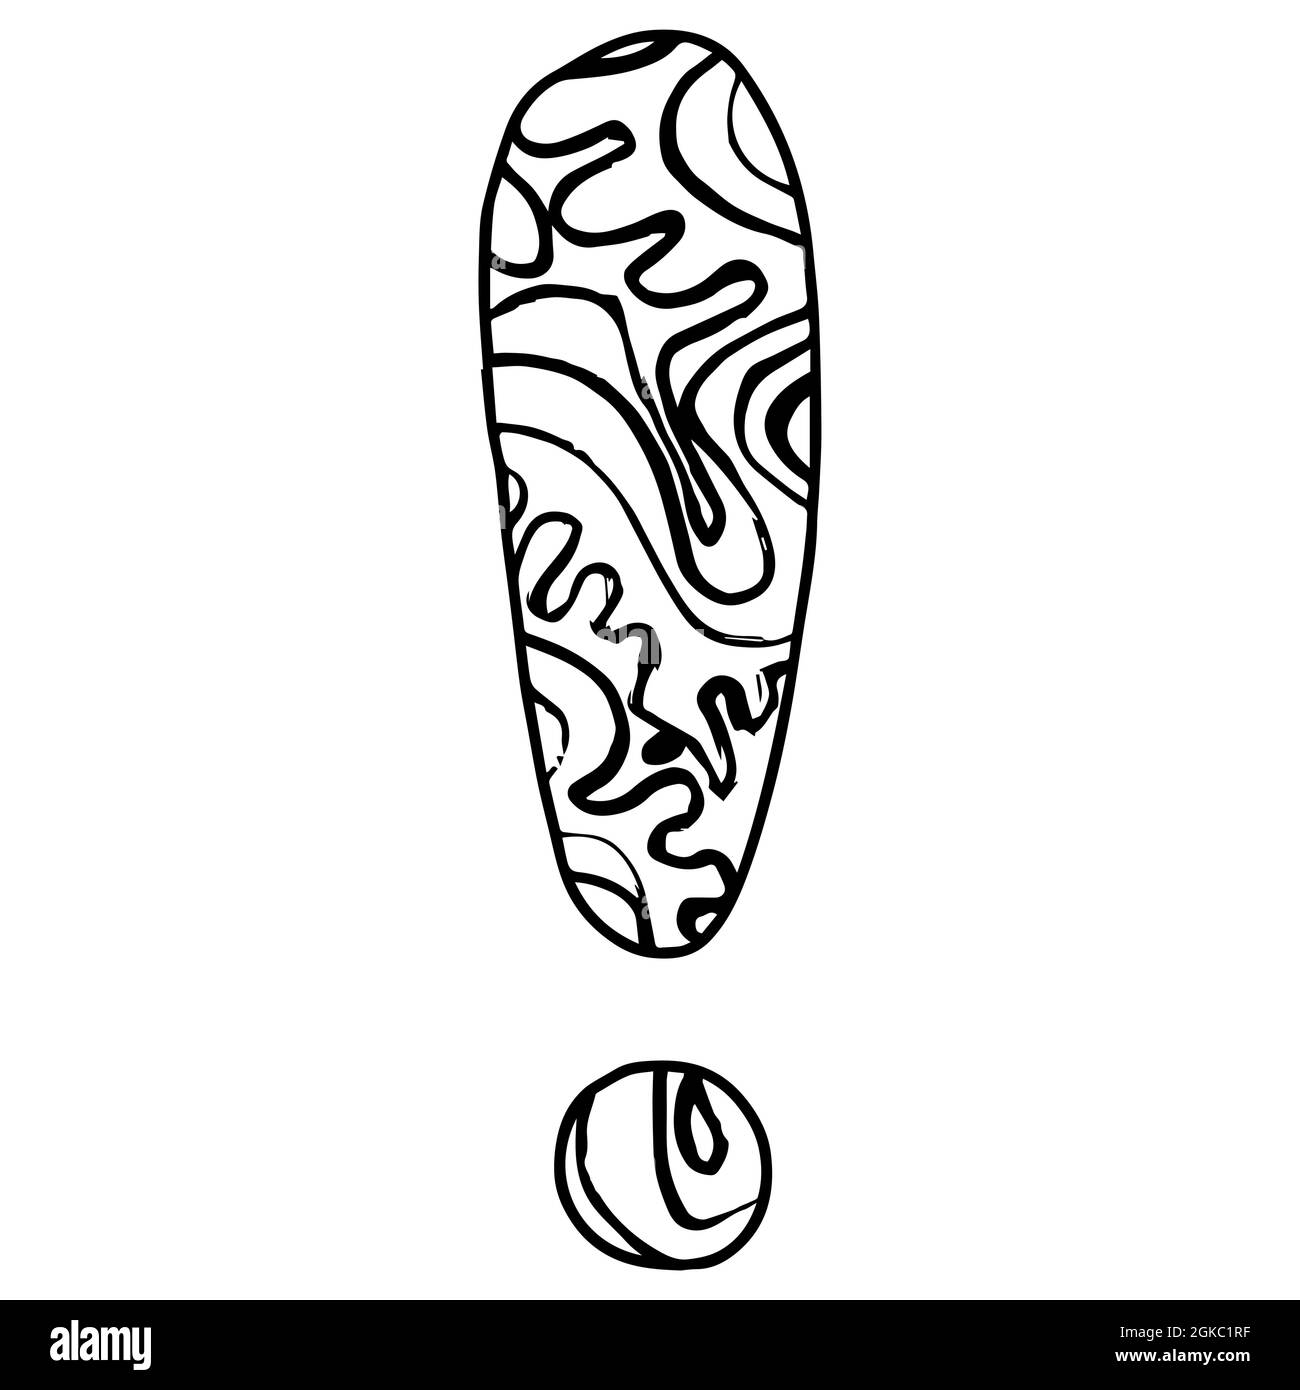 exclamation mark coloring page